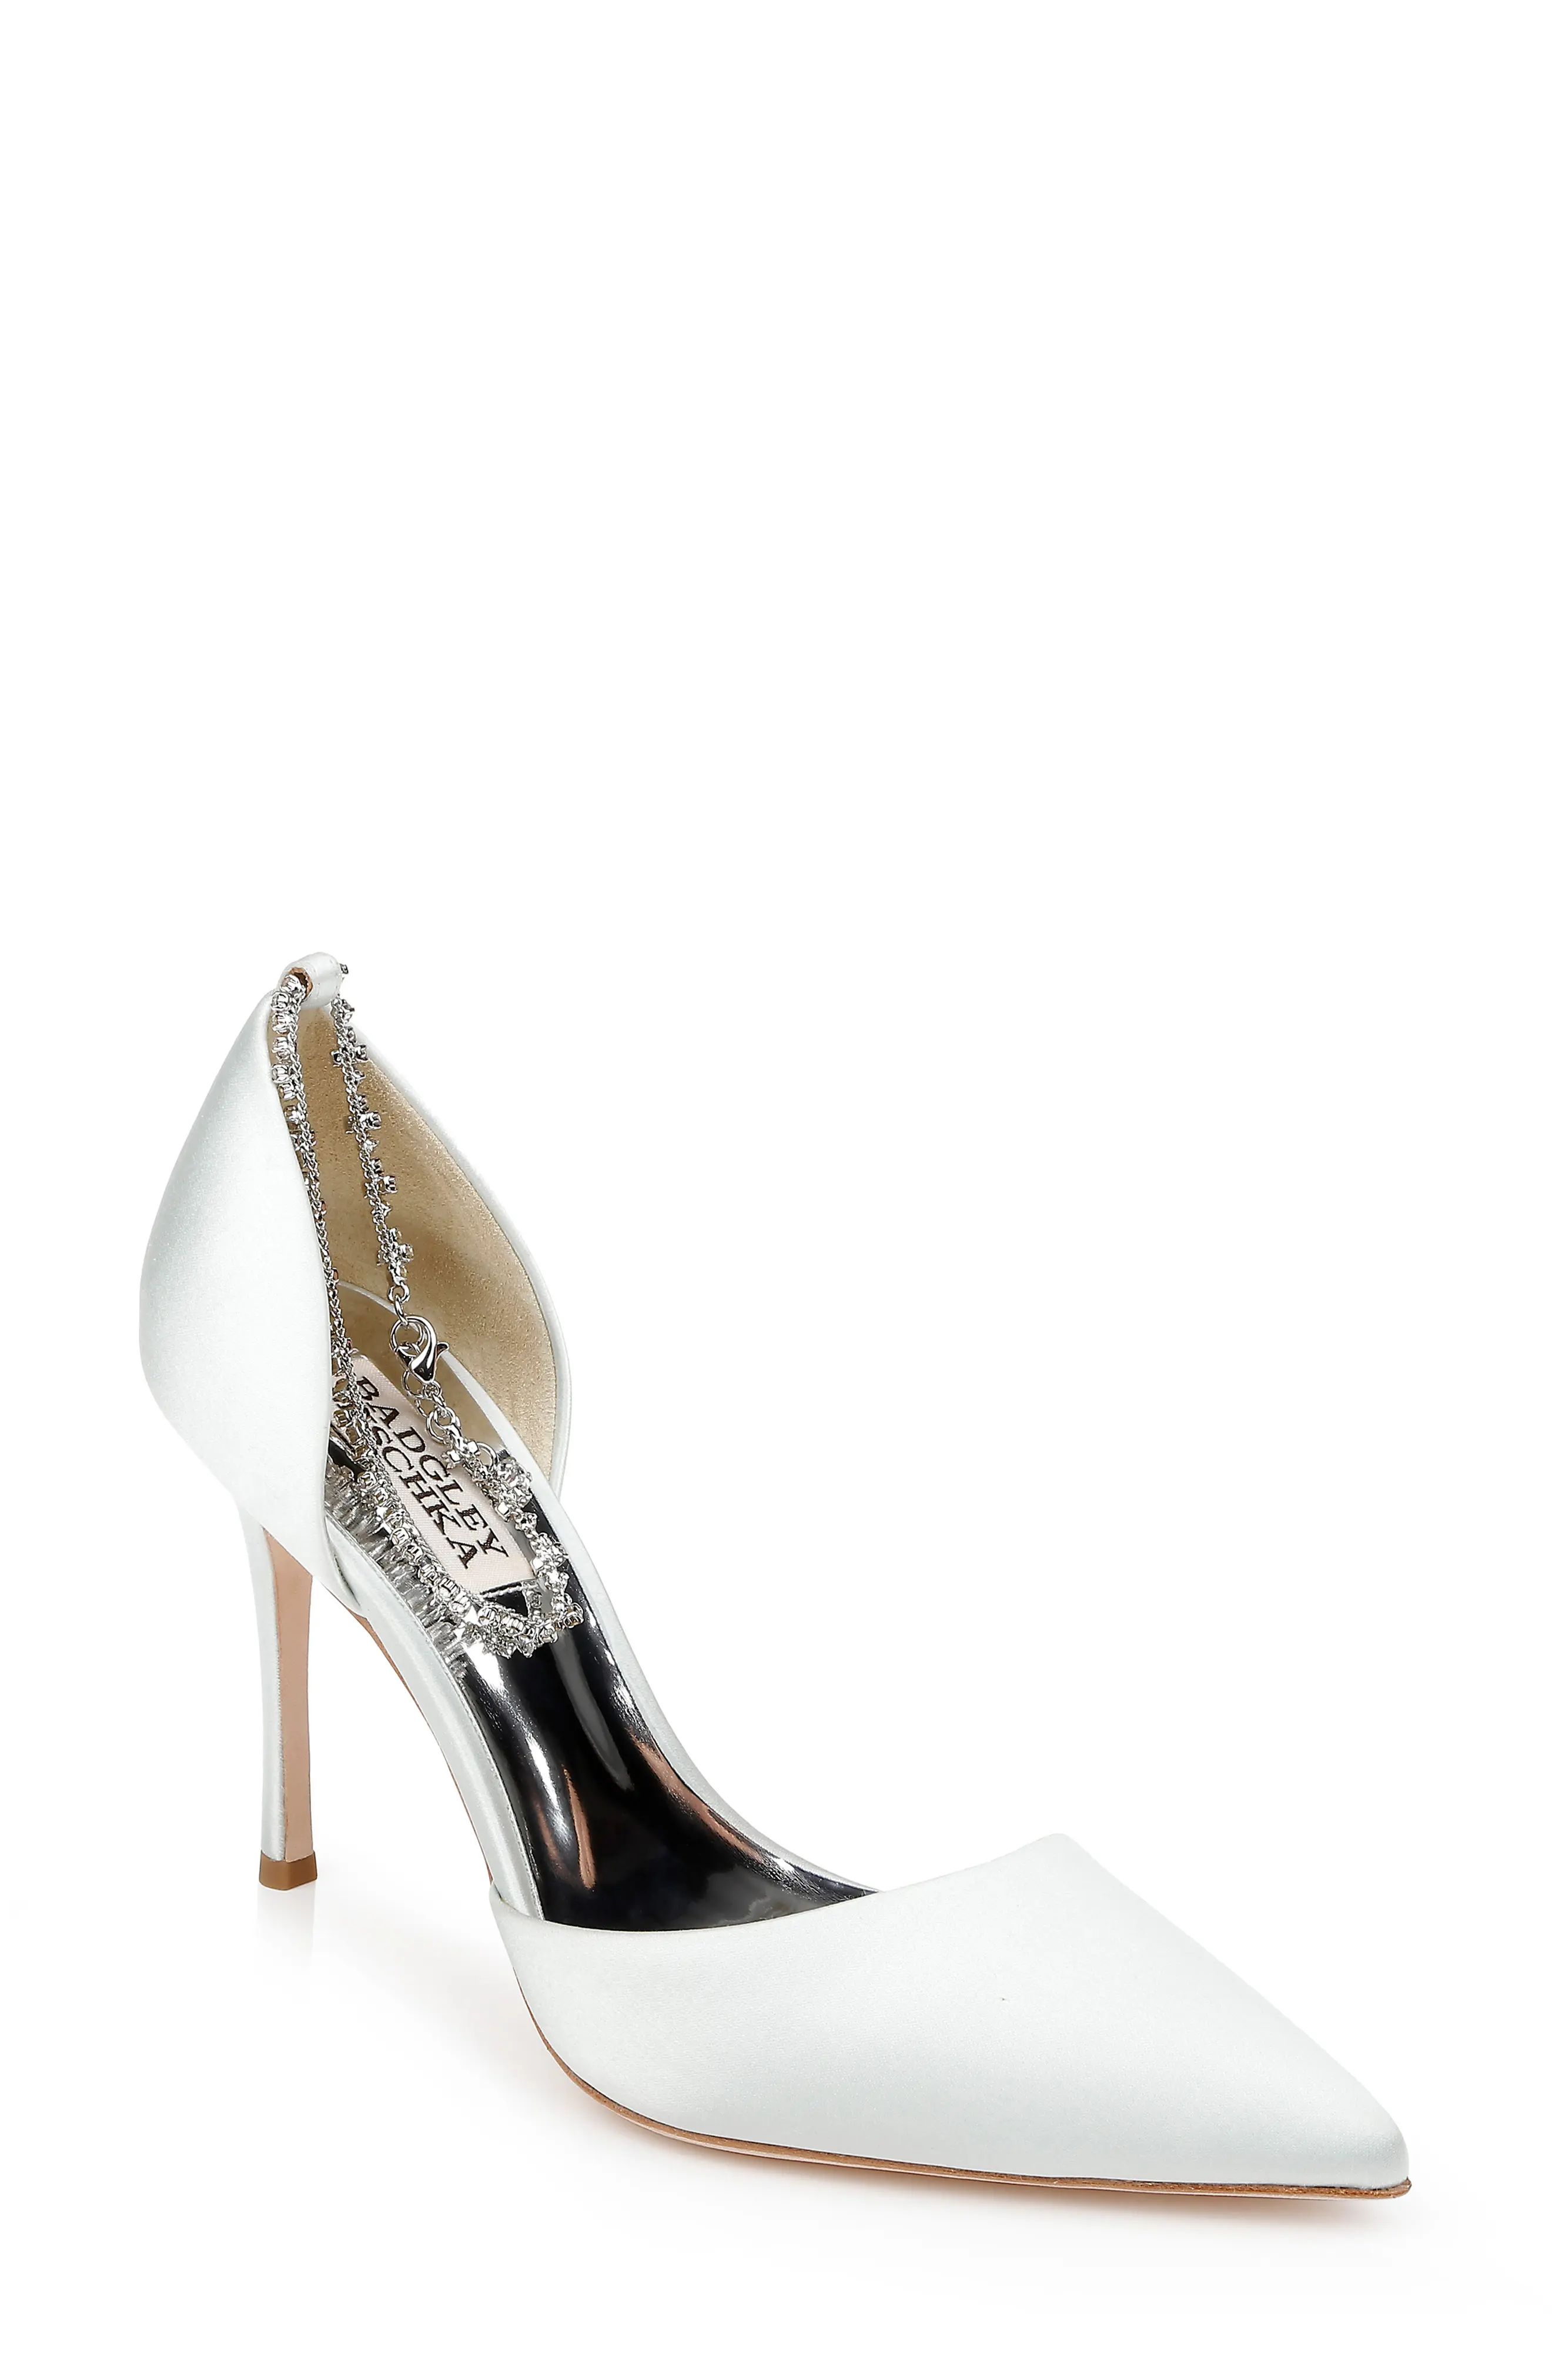 Badgley Mischka Collection Tierra d'Orsay Pointed Toe Pump in Soft Blue Radiance at Nordstrom, Size  | Nordstrom